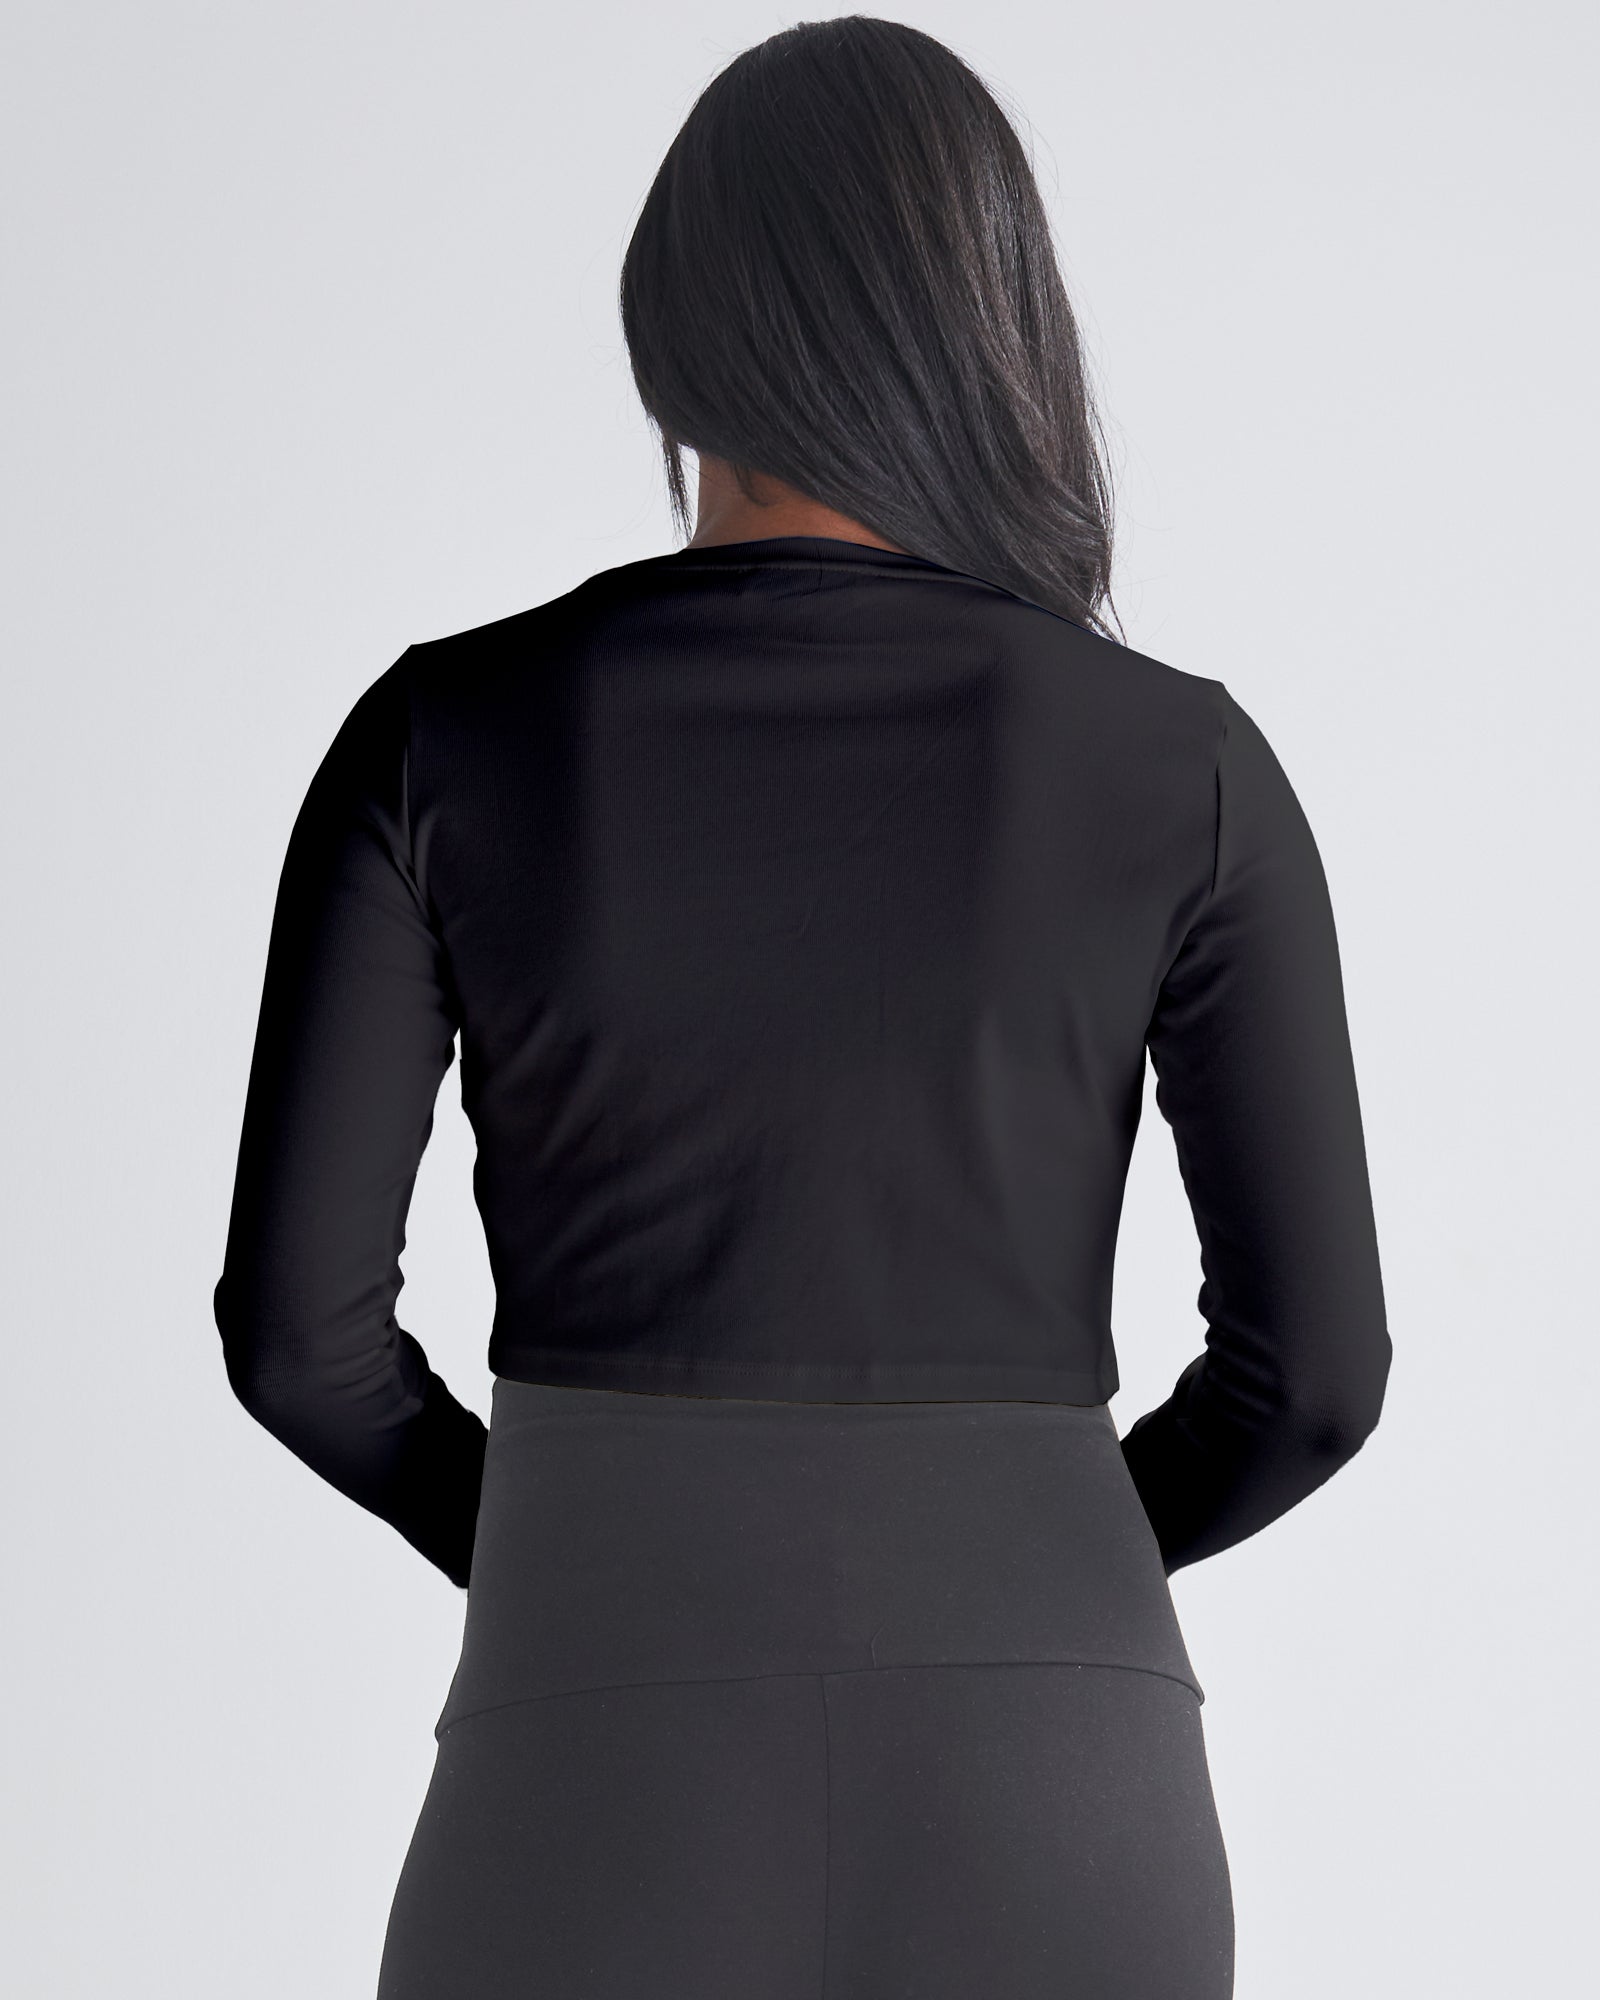 Back View - A Pregnant Woman Wearing Long Sleeve Cotton Black Maternity Crop Top from Angel Maternity